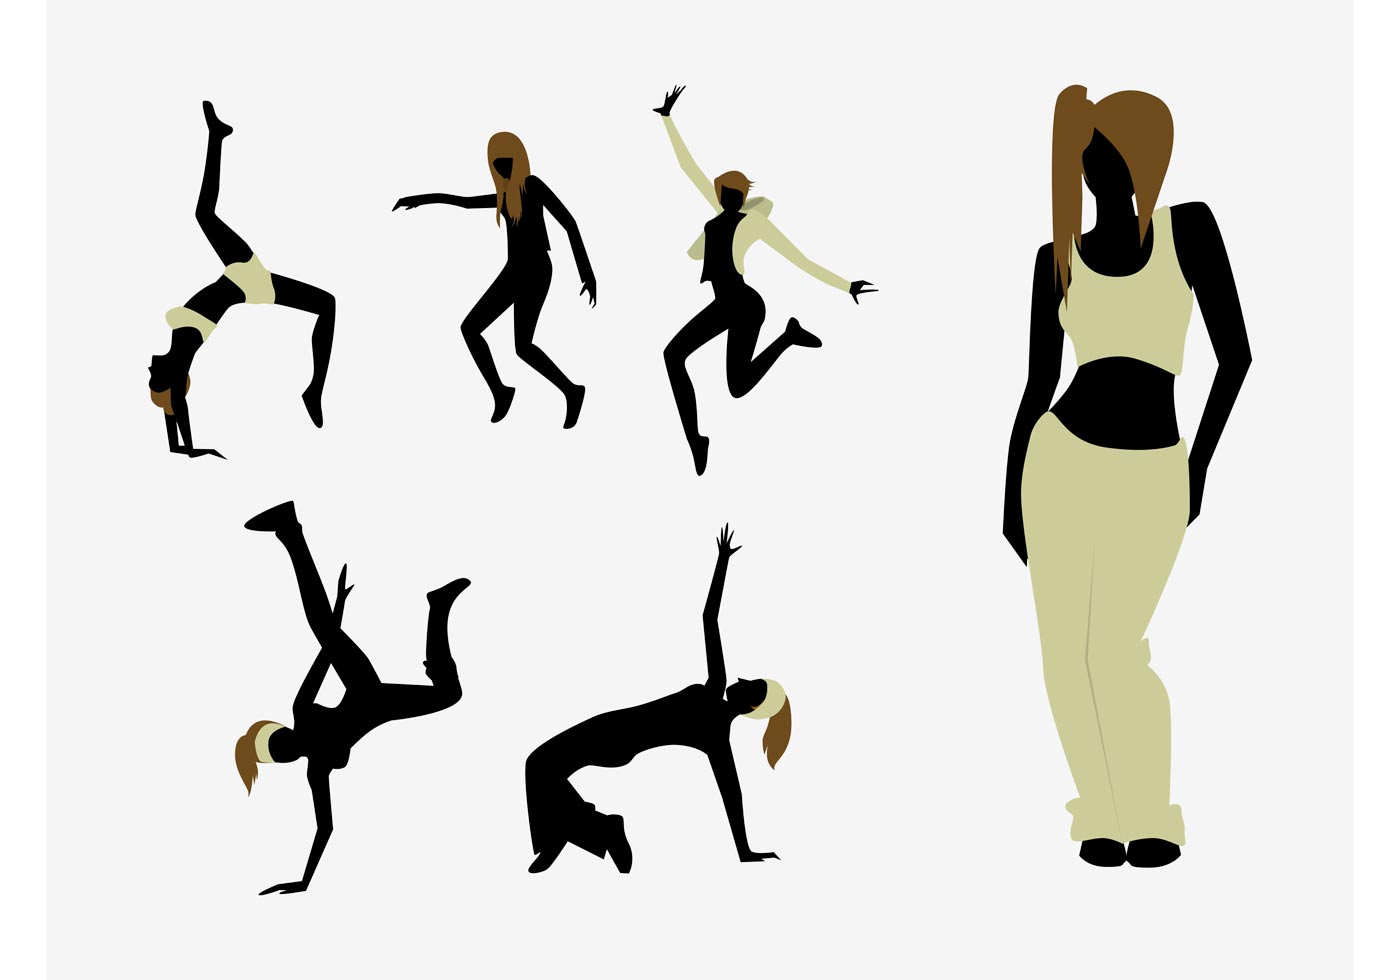 Breakdance Silhouettes - Download Free Vector Art, Stock Graphics ...